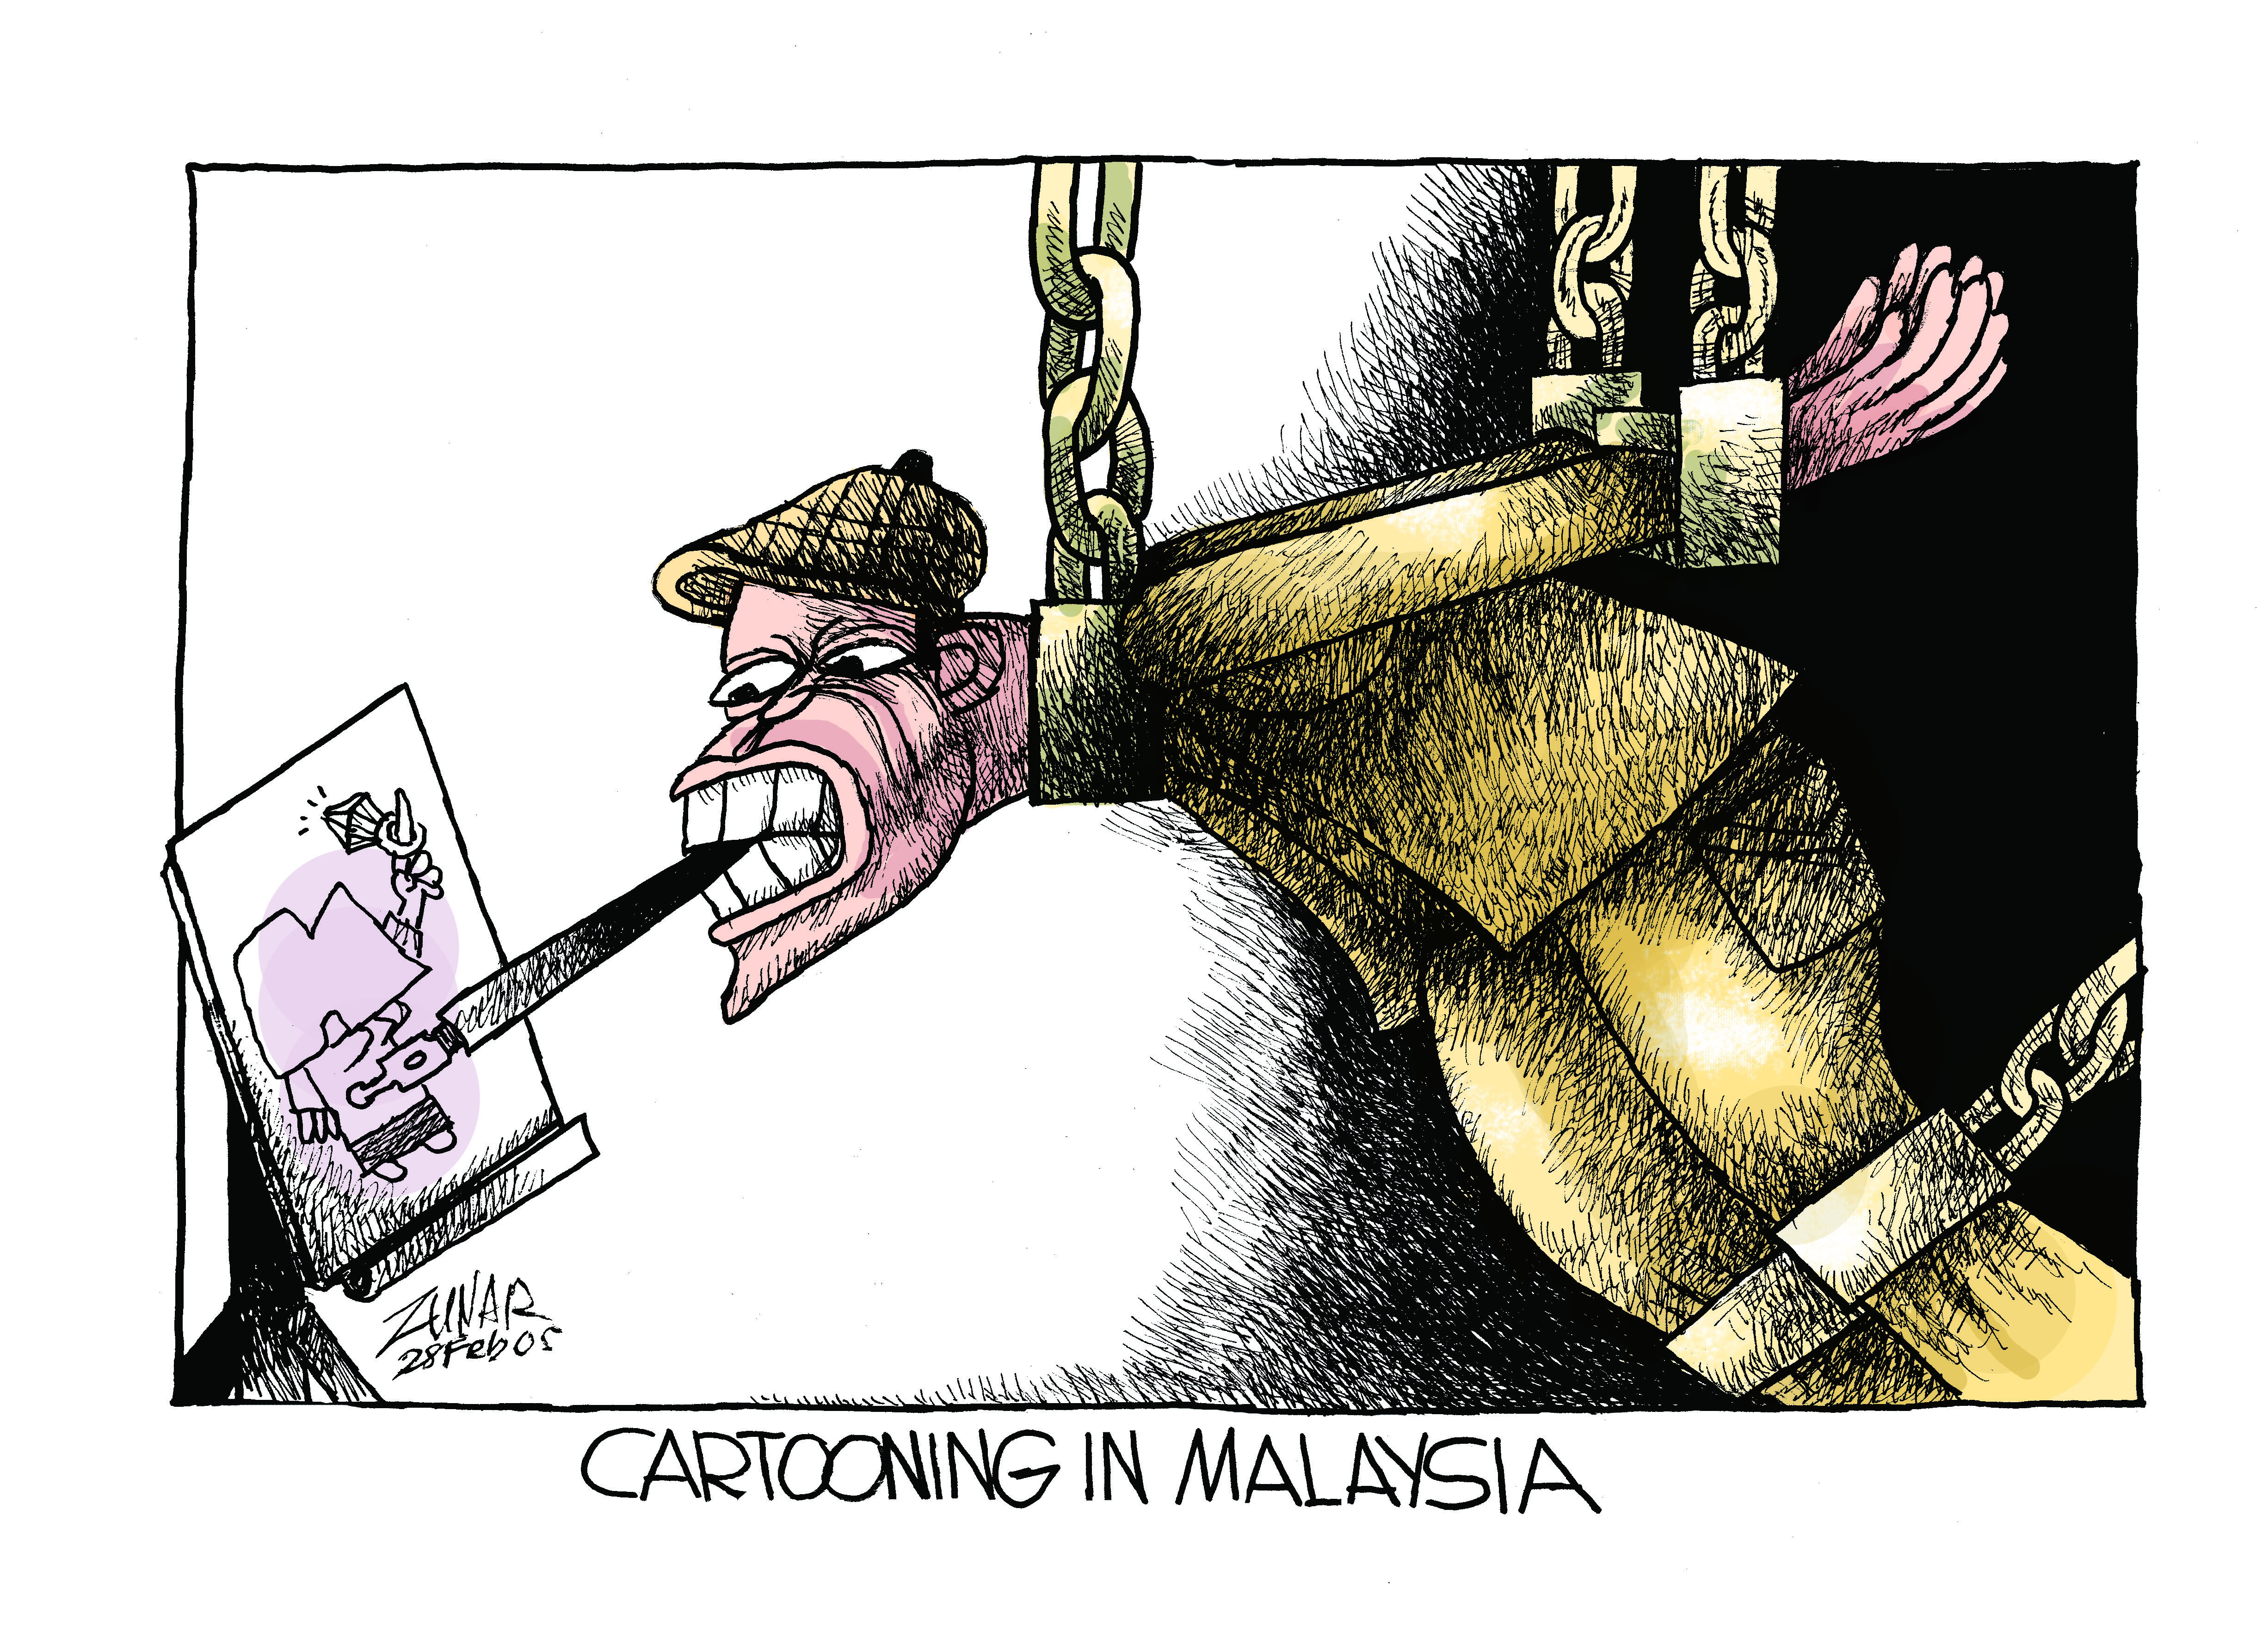 14 May: Zunar in conversation with Martin Rowson